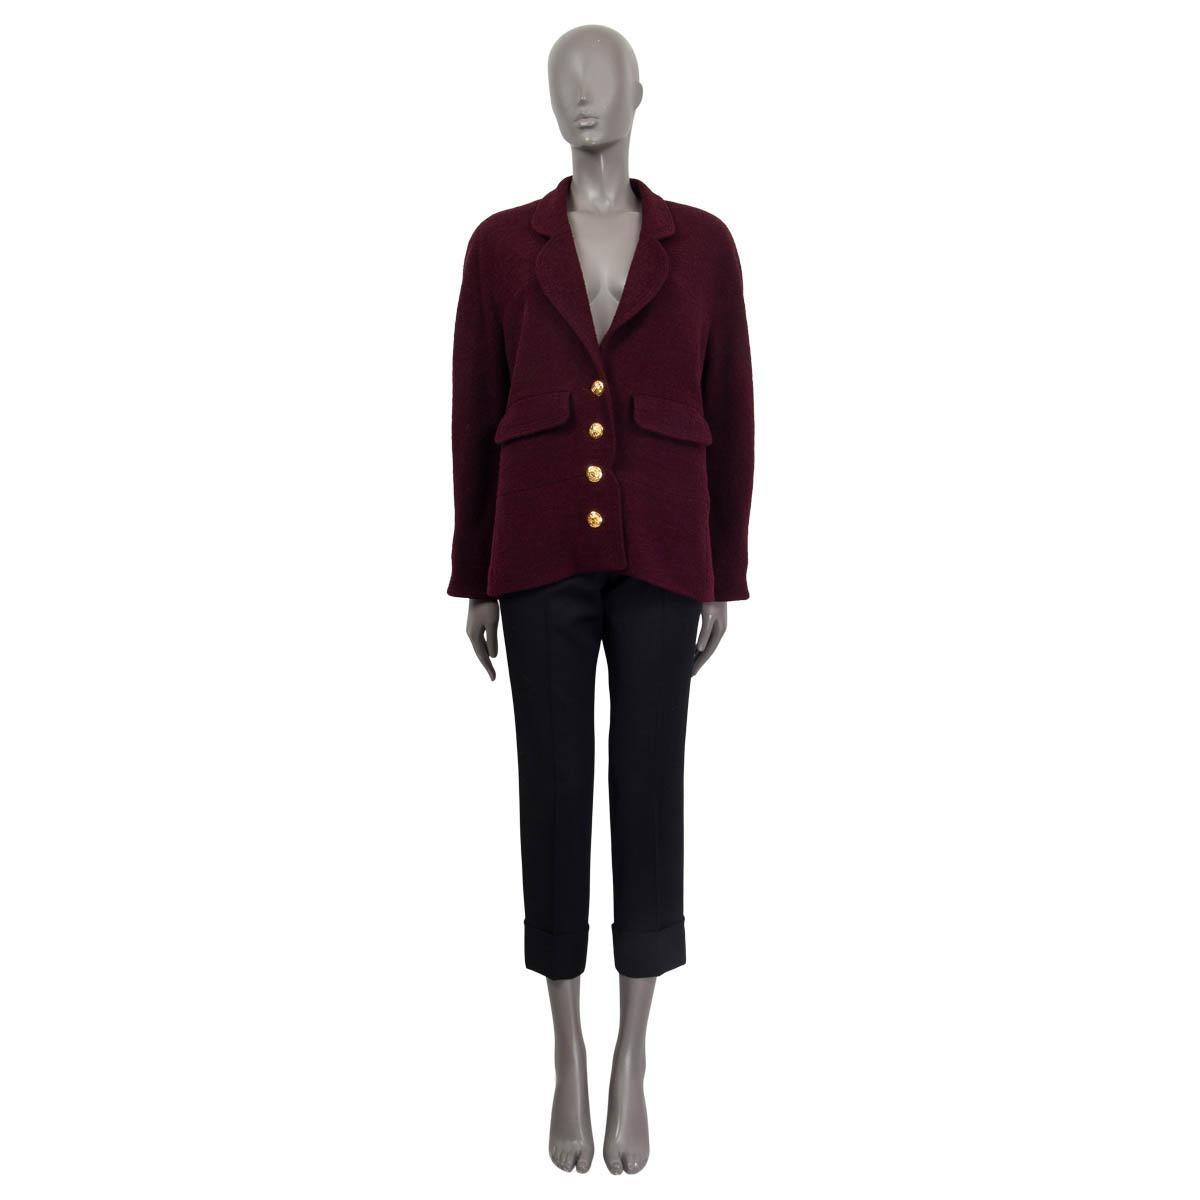 100% authentic Chanel tweed blazer in burgundy wool (assumed cause tag is missing). Features raglan sleeves (sleeve measurements taken from the neck) and two front flap pockets. Opens with four golden 'CC' buttons on the front. Lined in burgundy